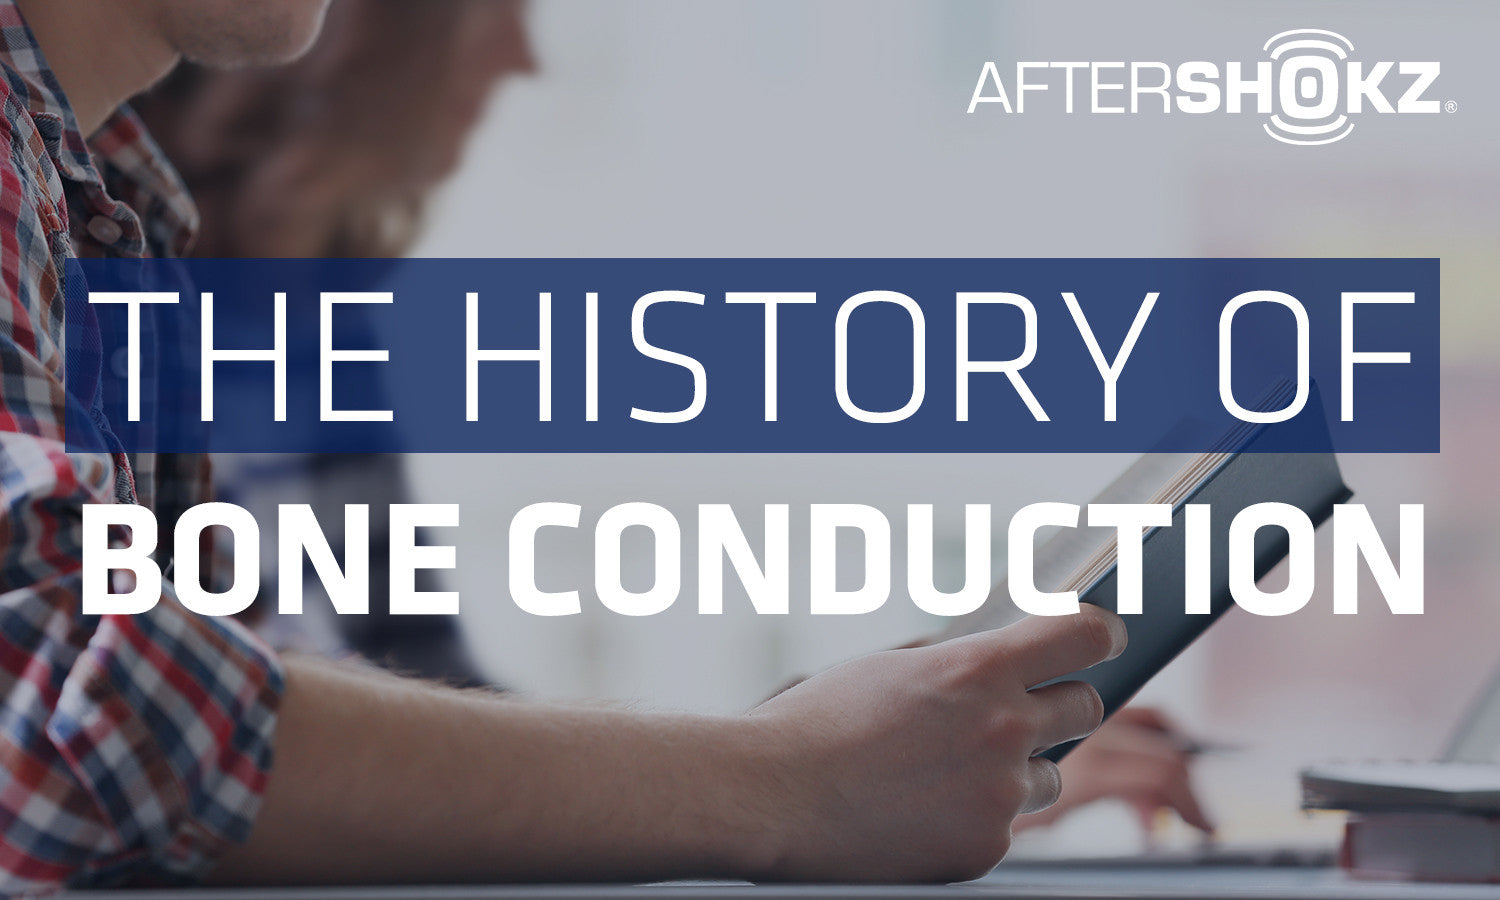 The History of Bone Conduction Technology